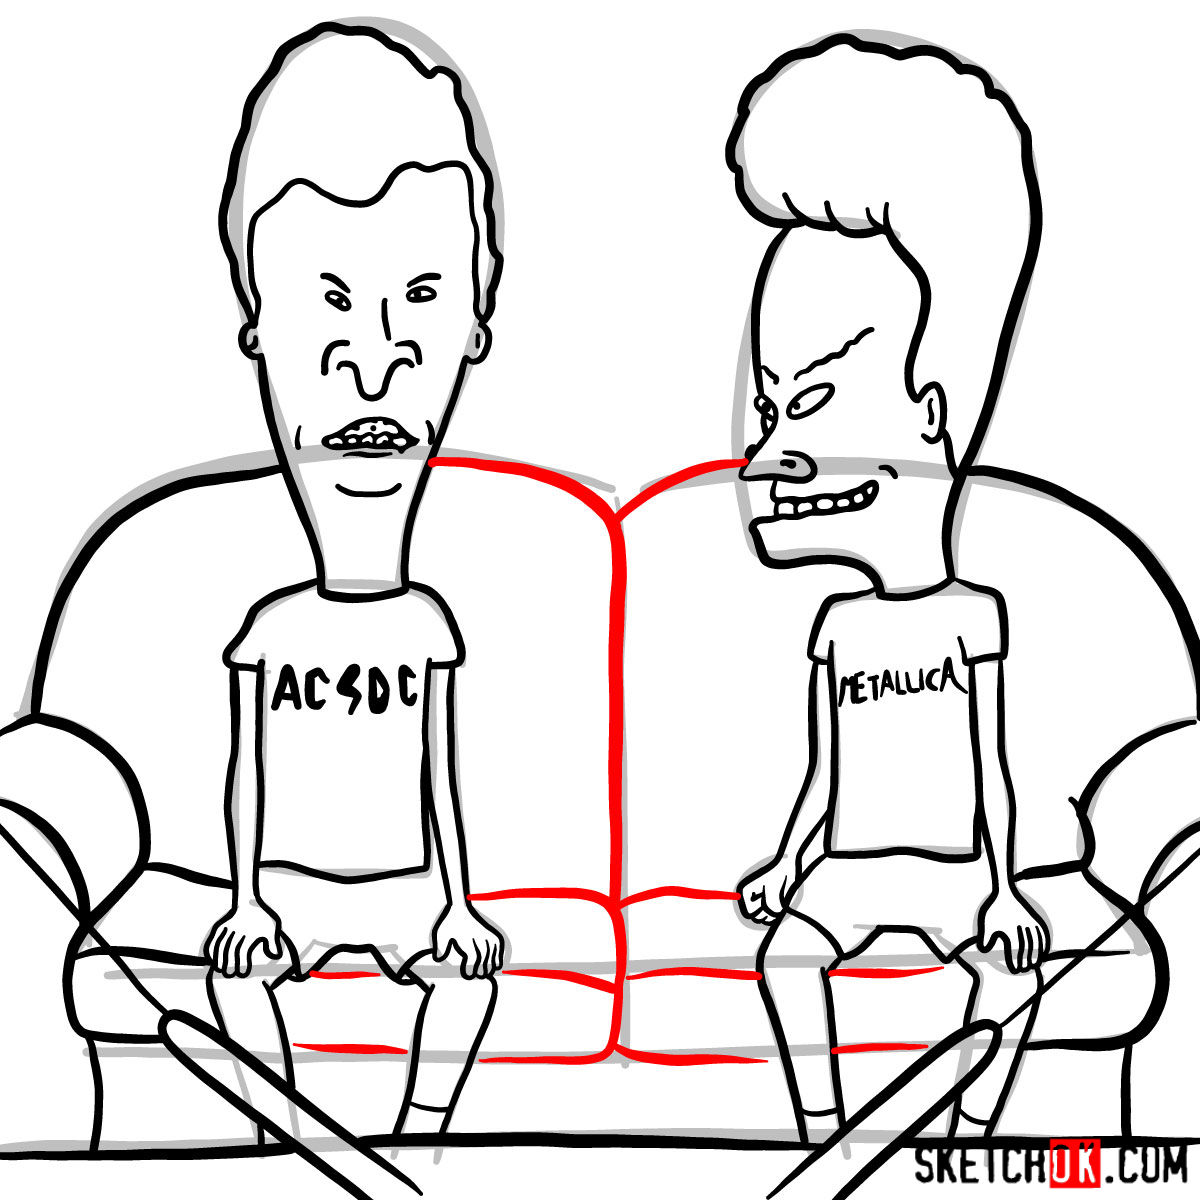 How to draw Beavis and Butt-Head - step 20